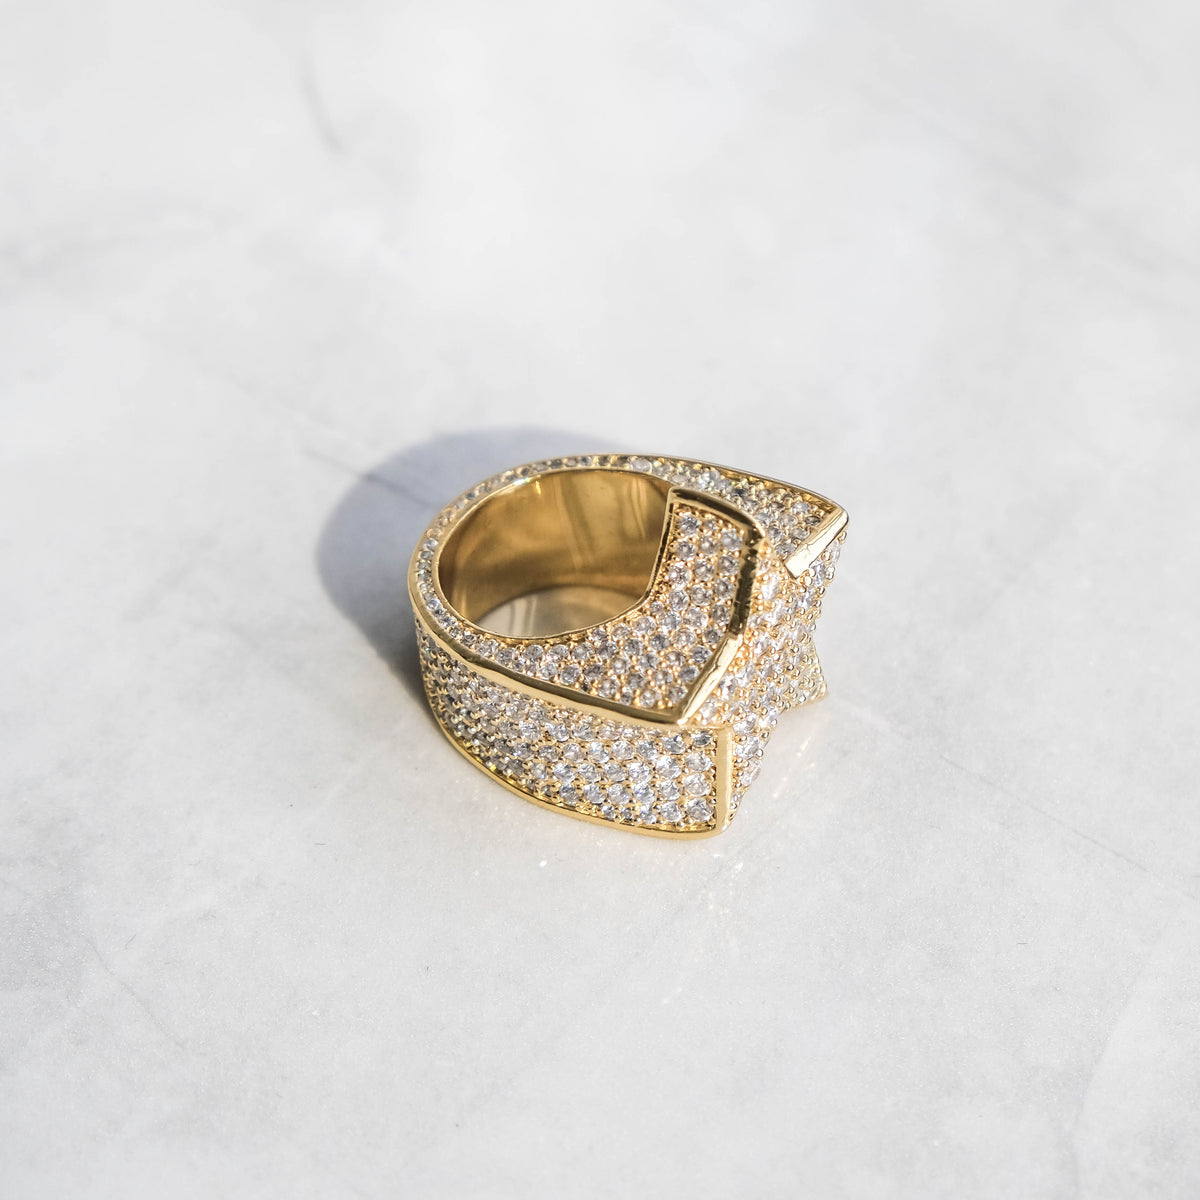 Solid Gold Ring with A Small Star 18K Rose